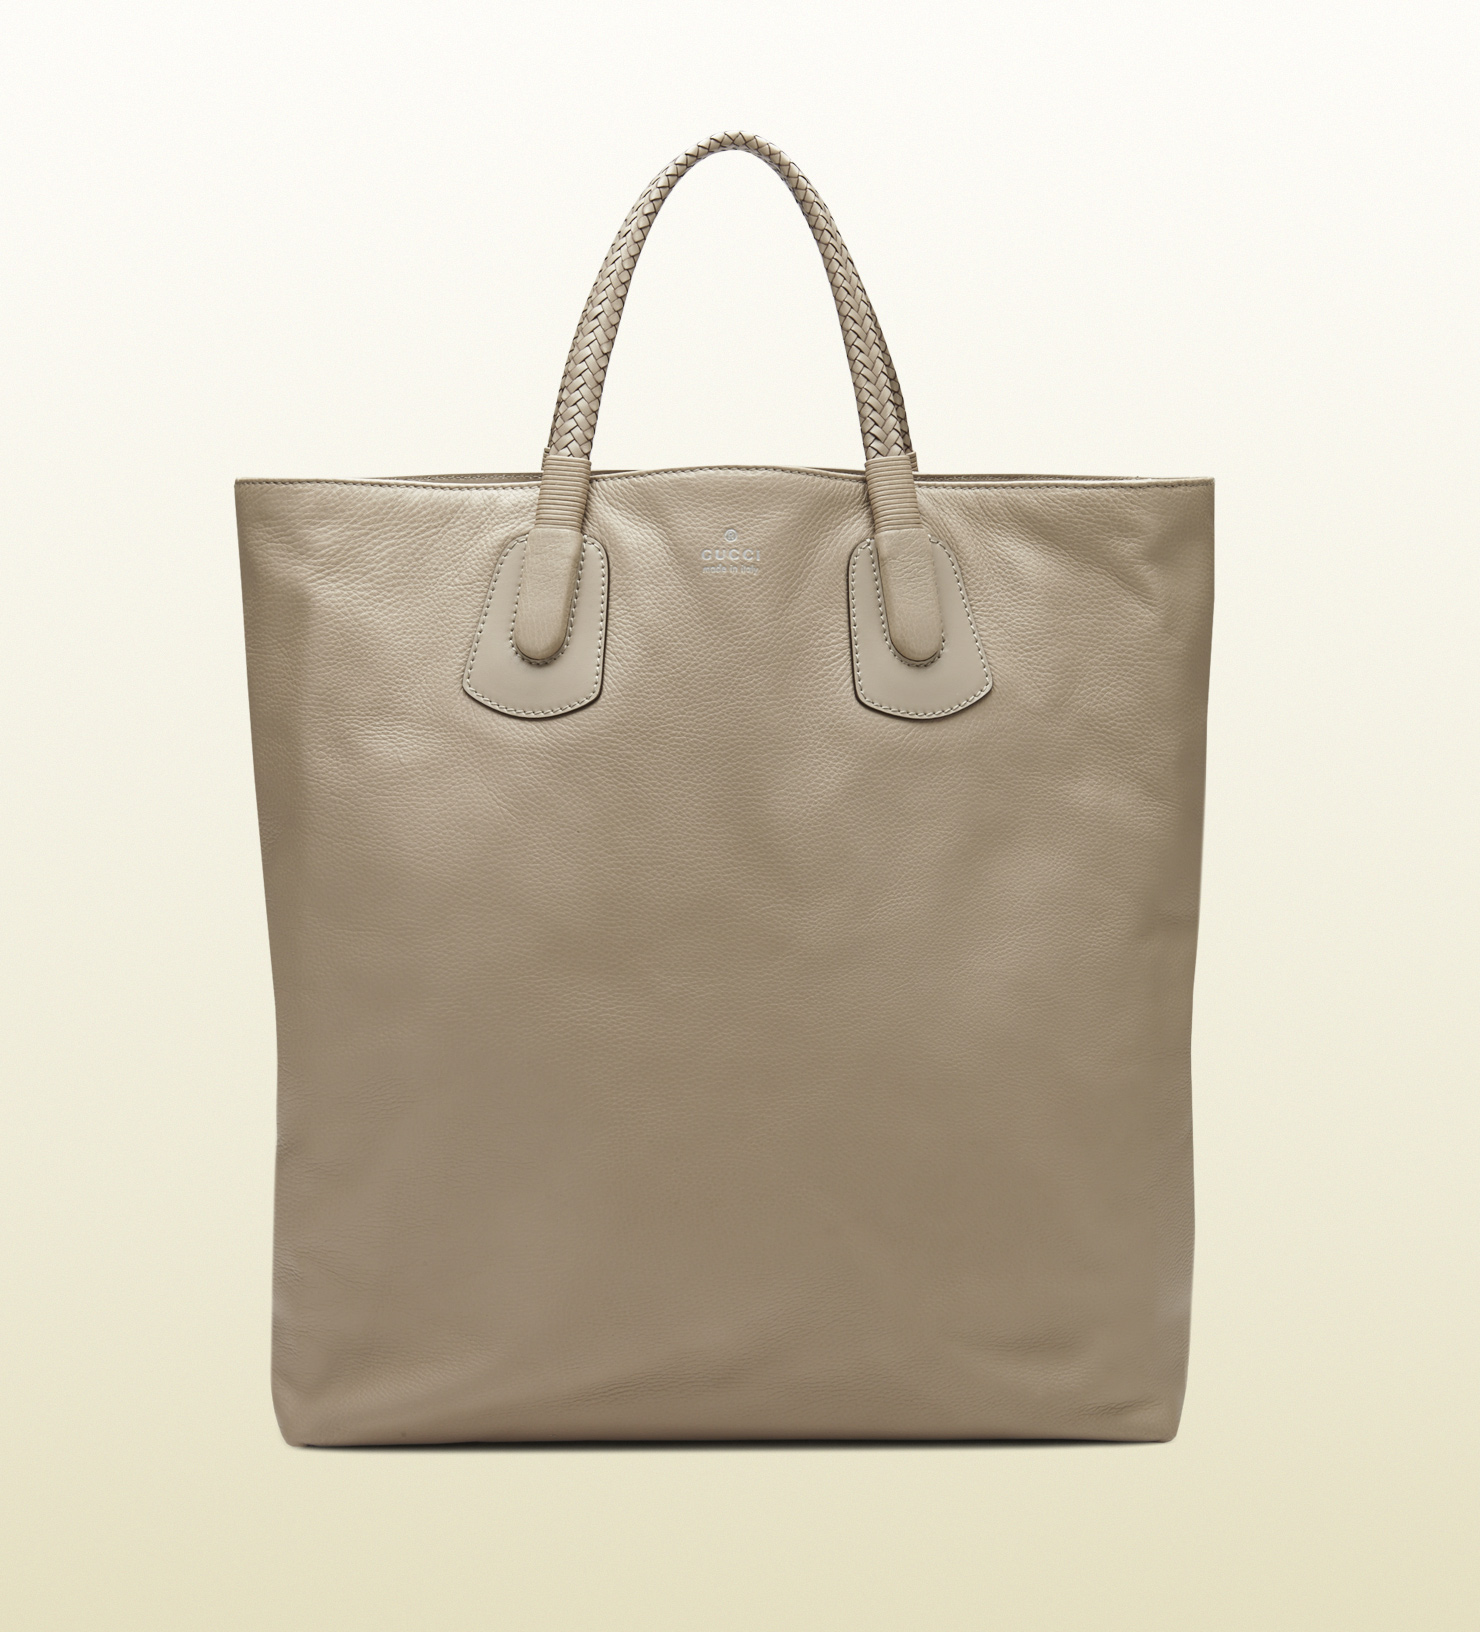 Gucci Beige Leather Tote Bag in Beige | Lyst